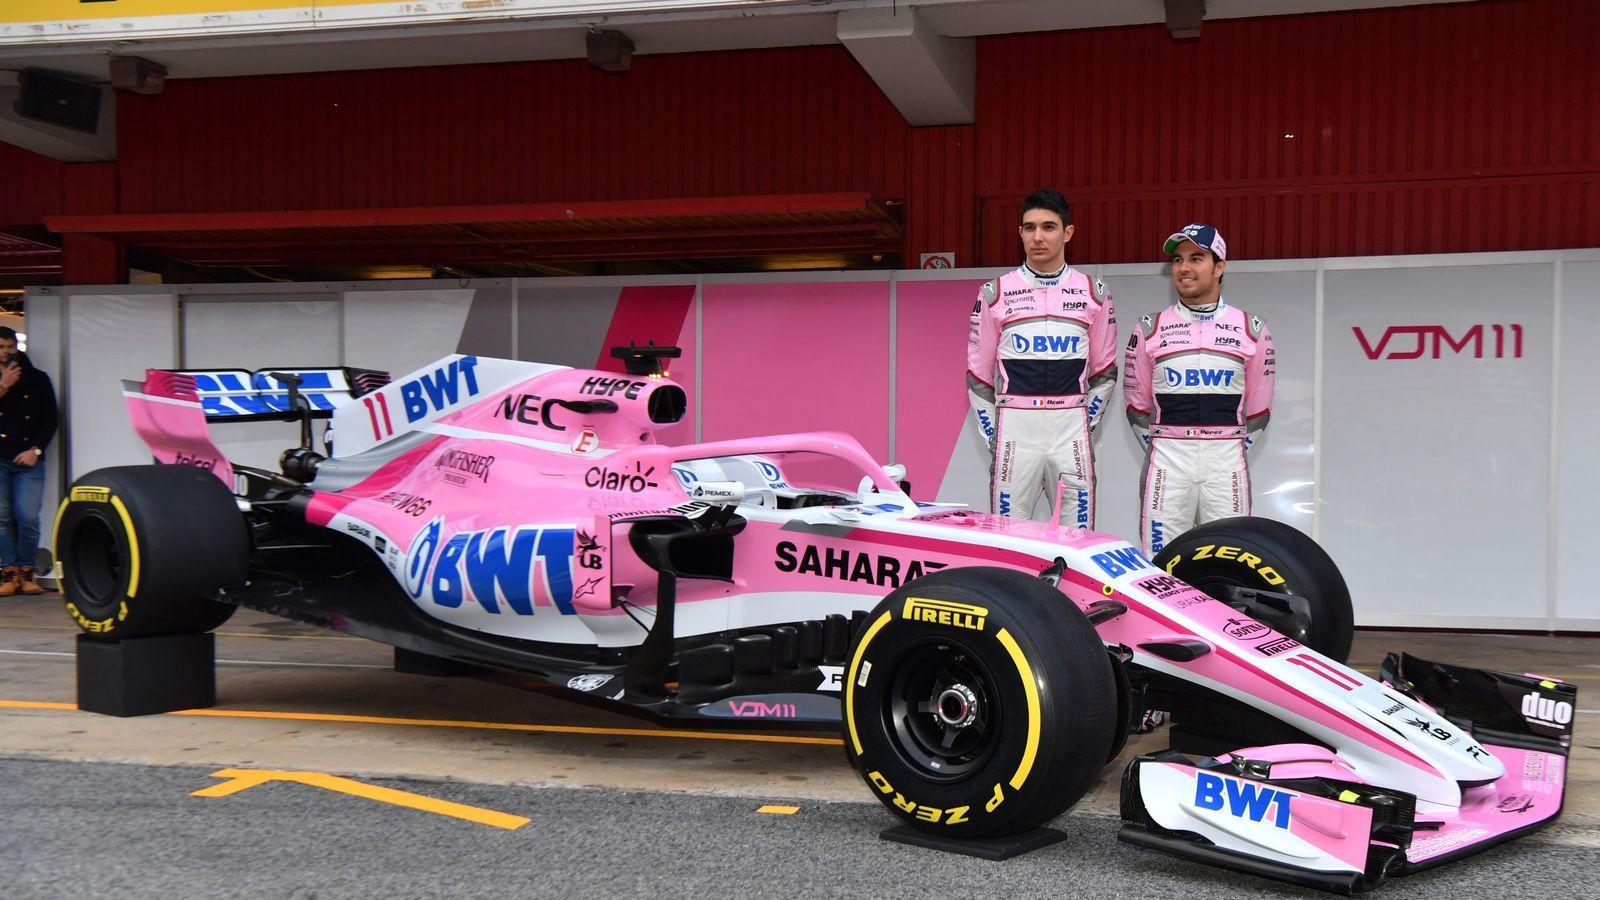 Force India unveil 2018 car, the VJM but no word on team's new name